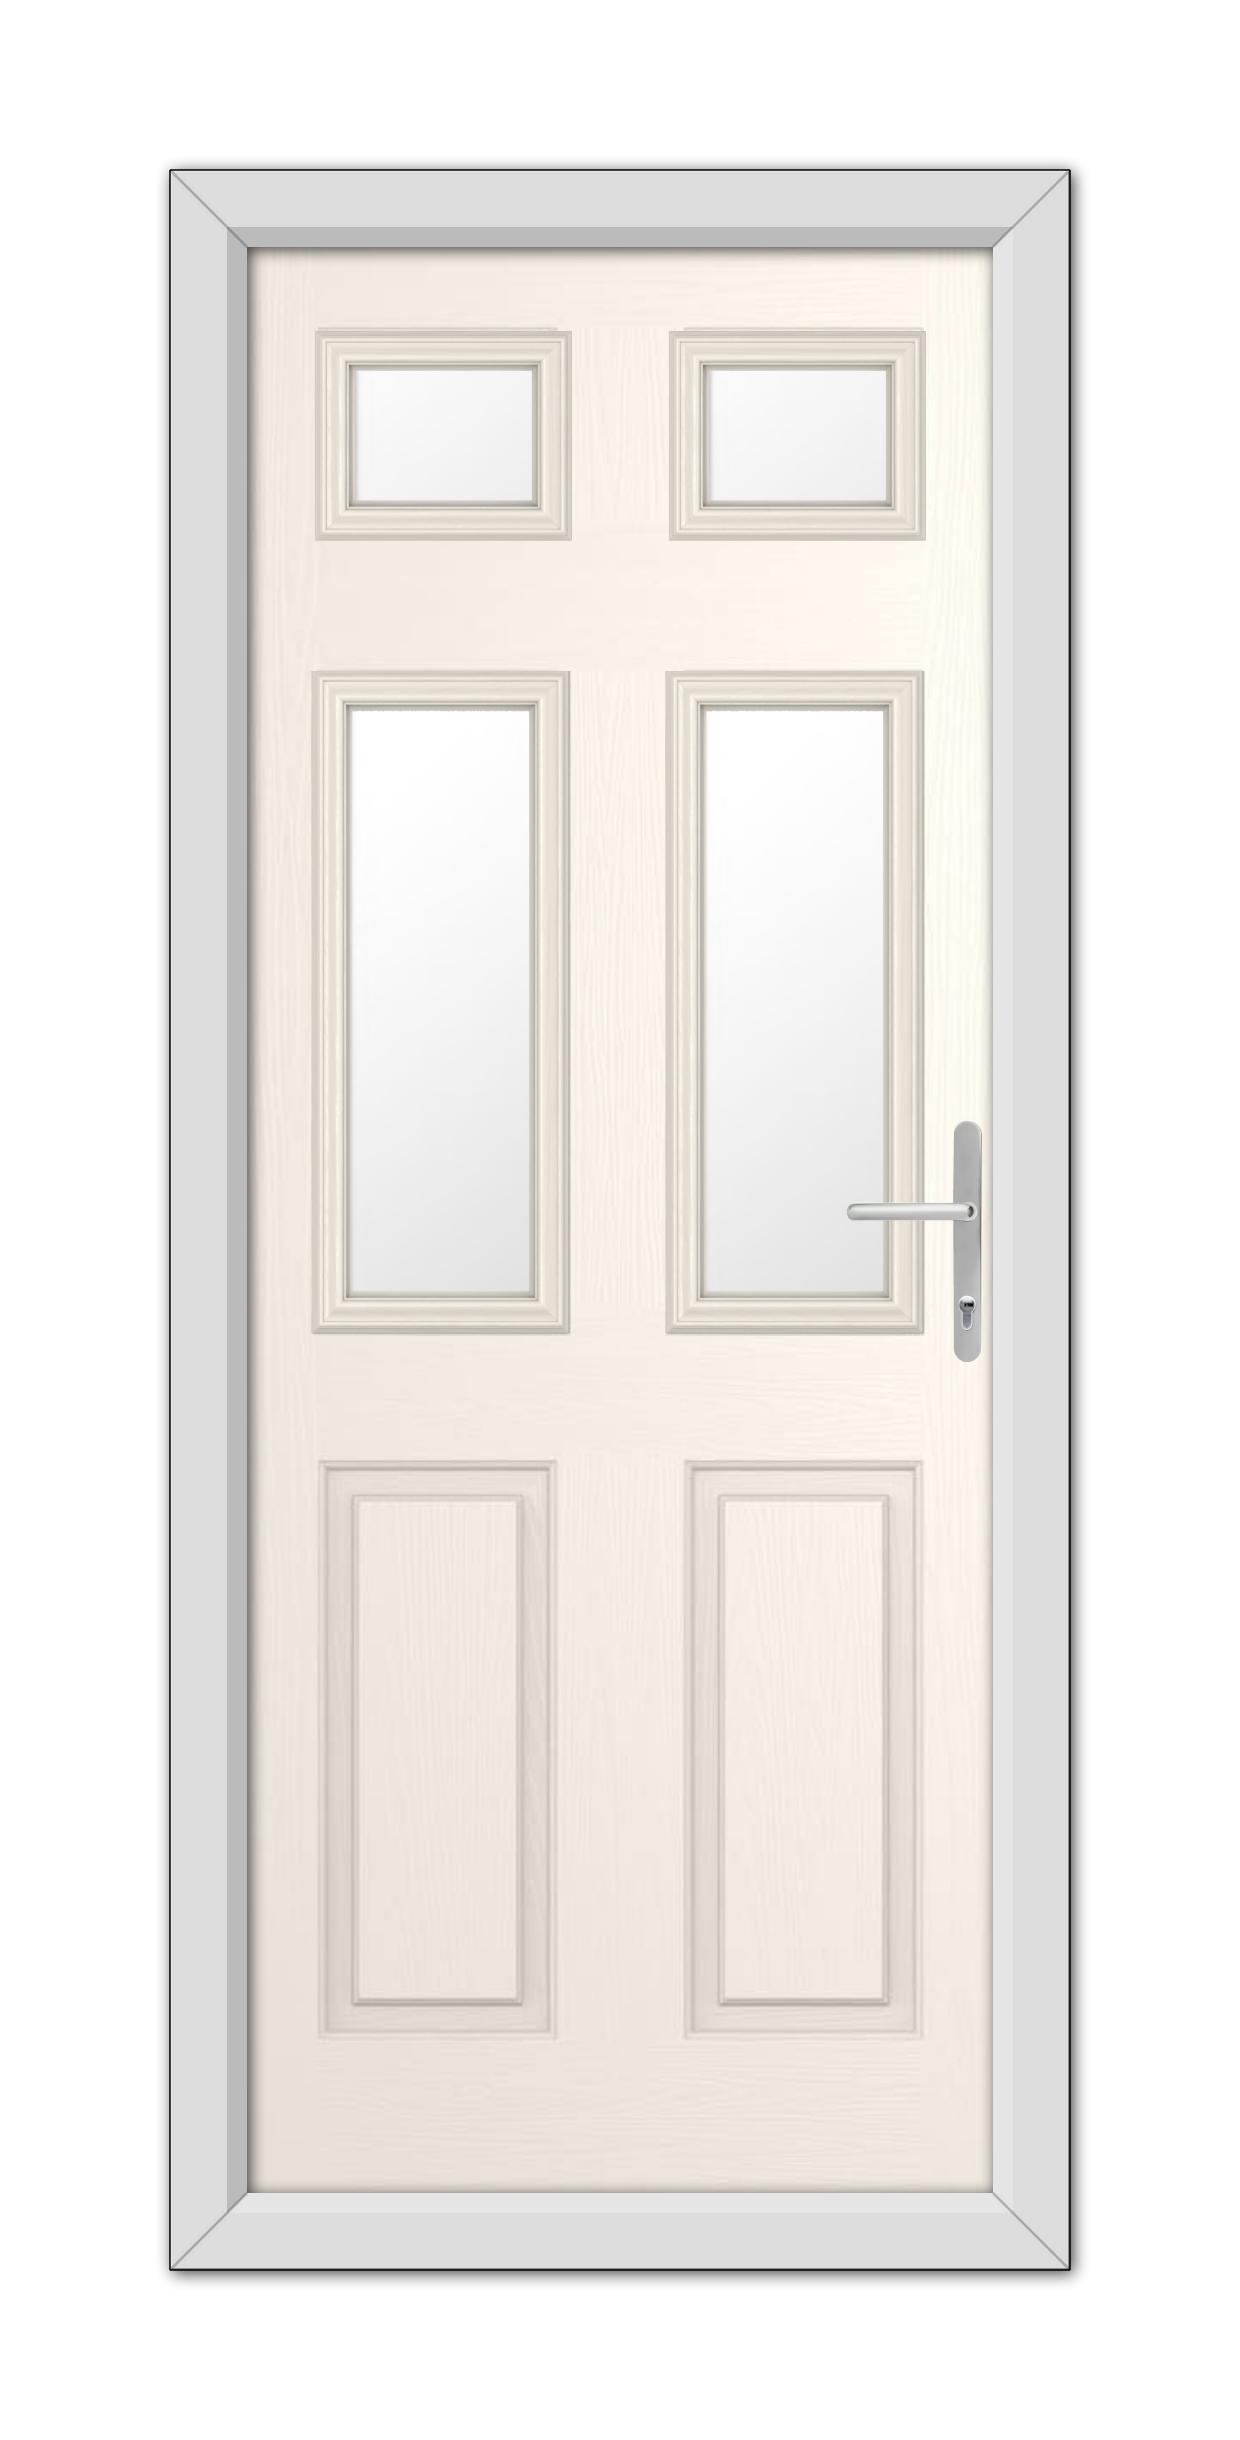 A modern White Foil Middleton Glazed 4 Composite Door 48mm Timber Core featuring six panels, three with glass windows, and a metal handle, set within a simple frame.